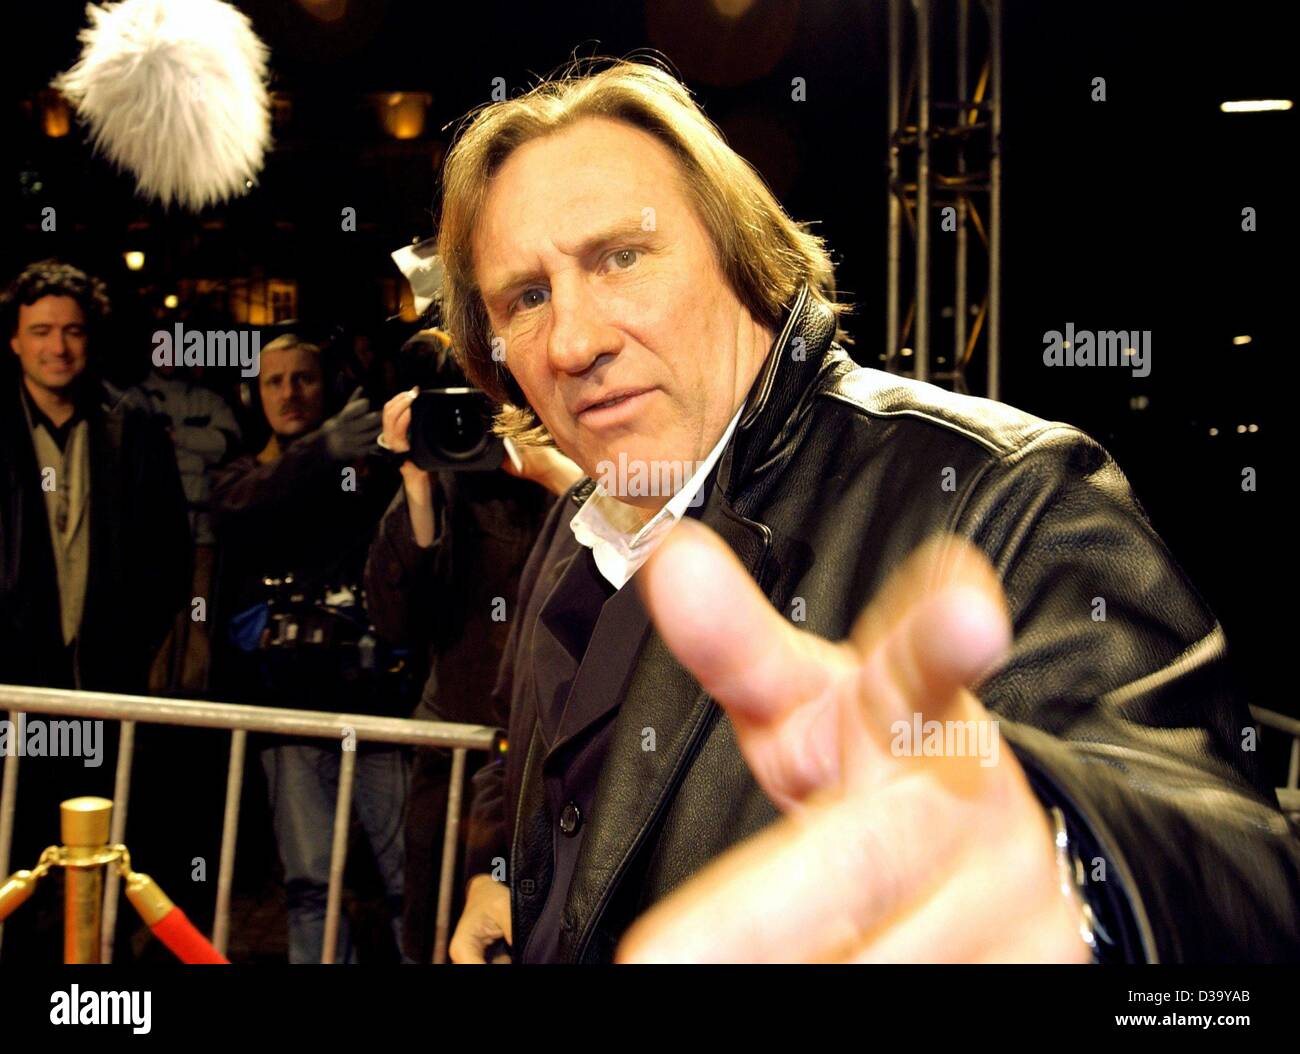 (dpa) - French actor Gerard Depardieu arrives to the German first night screening of his new film 'Asterix & Obelix - Mission Cleopatra' in Hamburg, 1.3.2002. 53-year-old Depardieu who stars again as Obelix said the two of them have much in common: Both love to eat, love people and love to play with Stock Photo